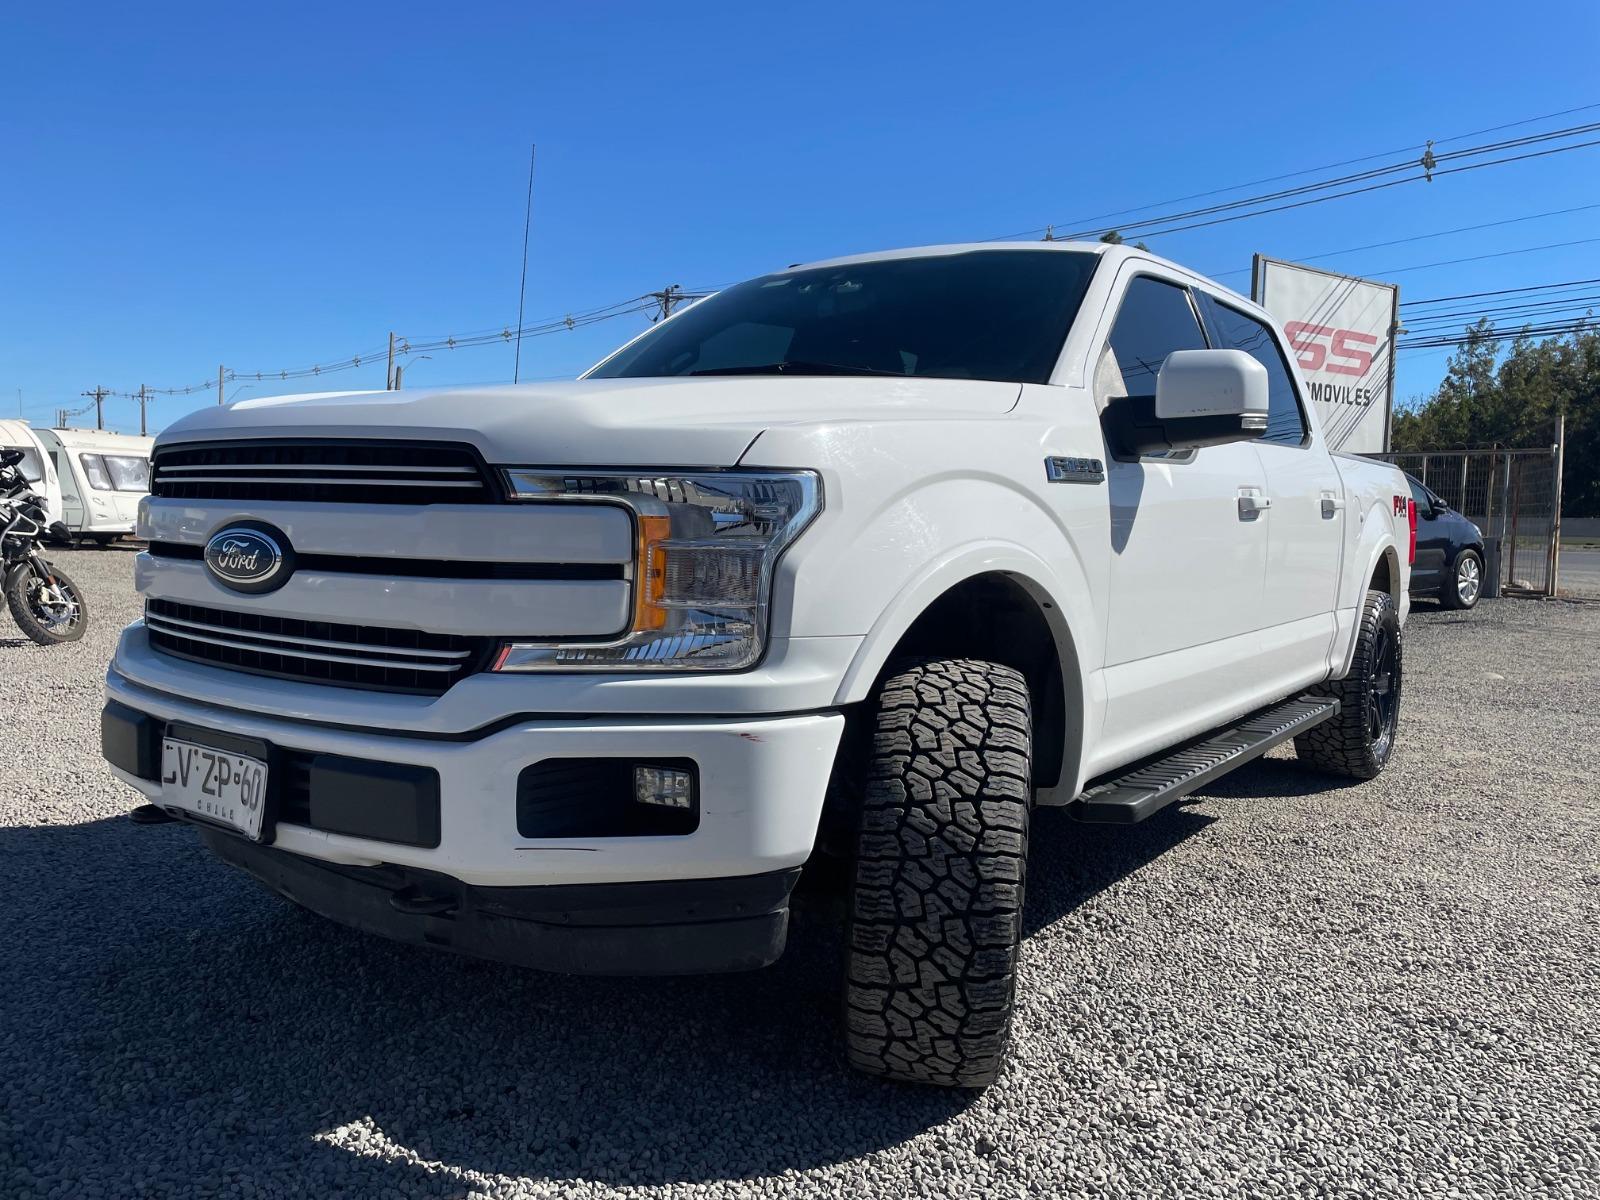 FORD F-150 Lariat 5.0 4X4 AT 2020 Ford F-150 - SS AUTOMOVILES